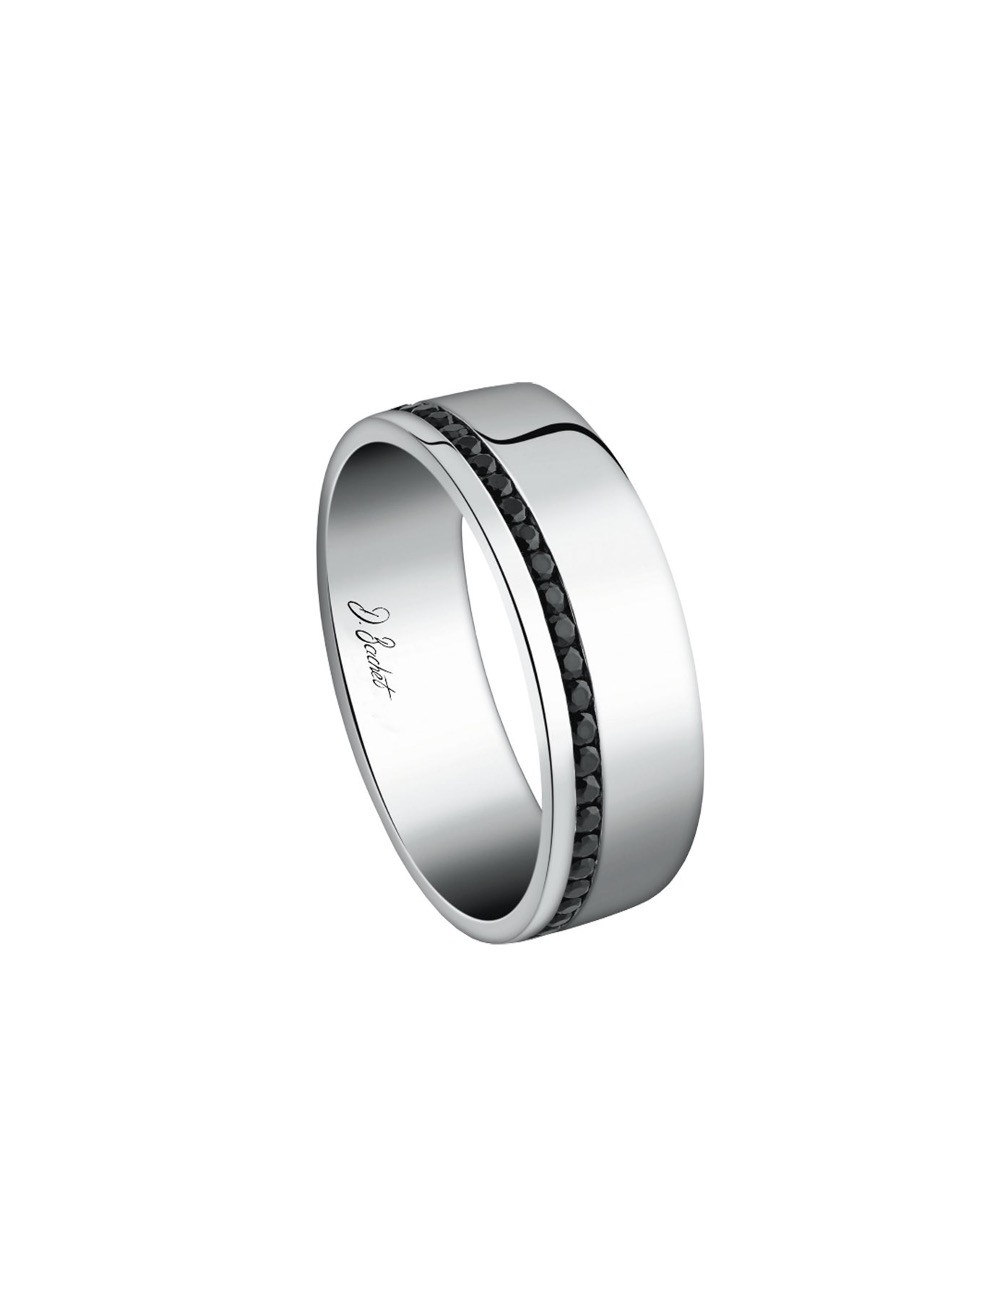 A wedding band for men with a wide and flat design made of an offset row of black diamonds